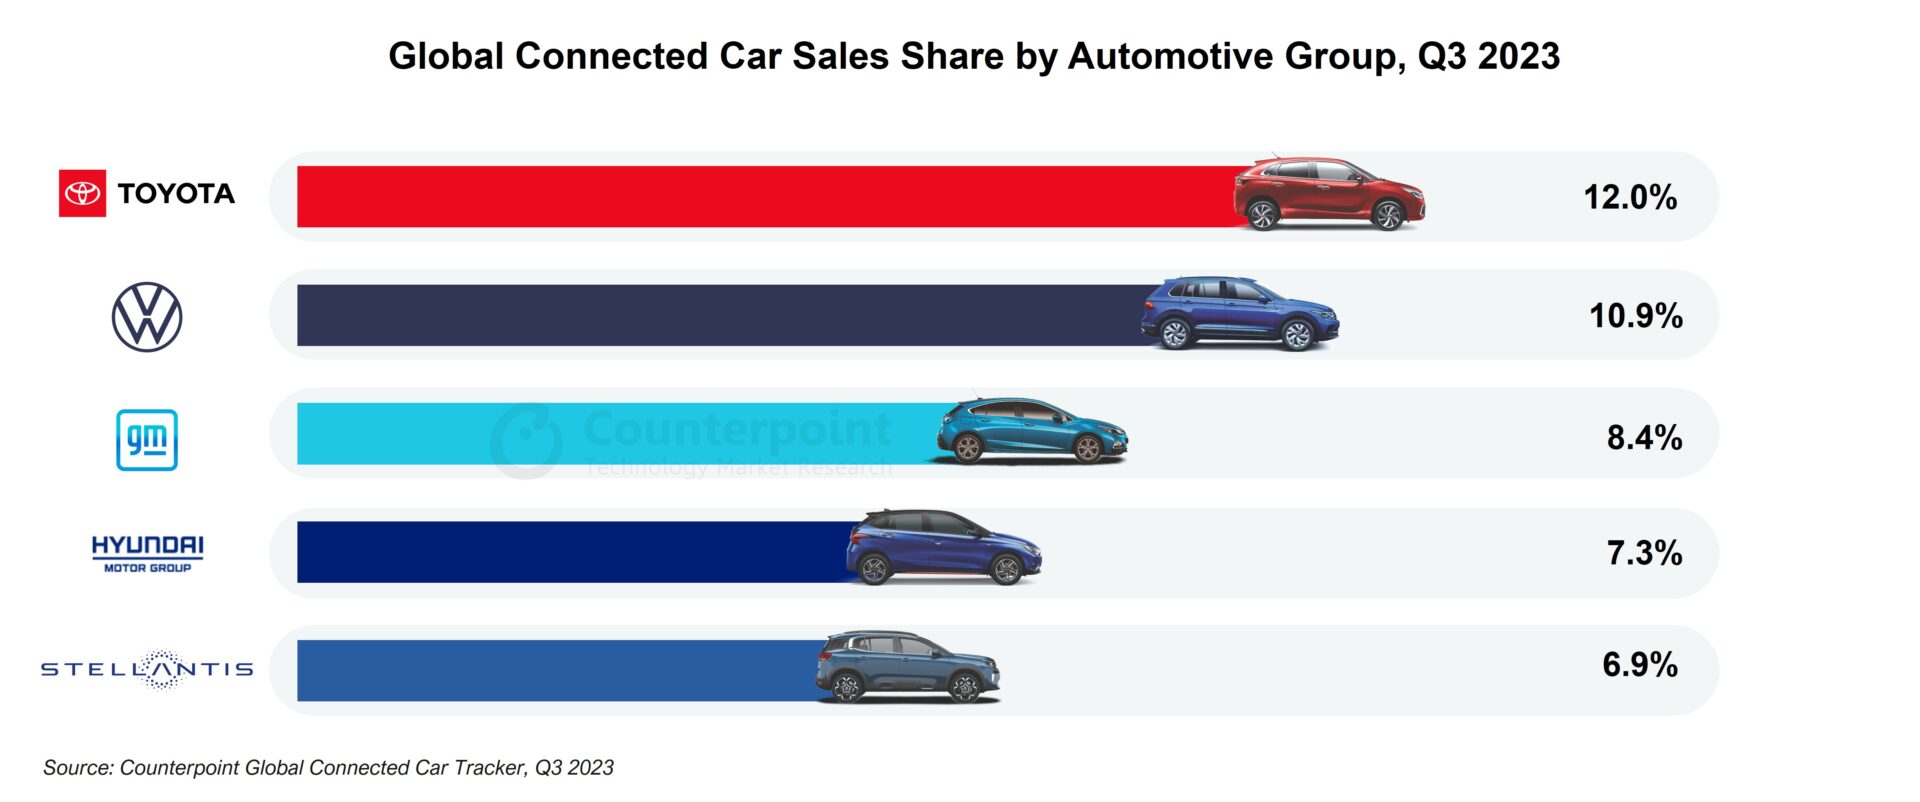 Global Car Sales Share by Automotive Group, Q3 2023